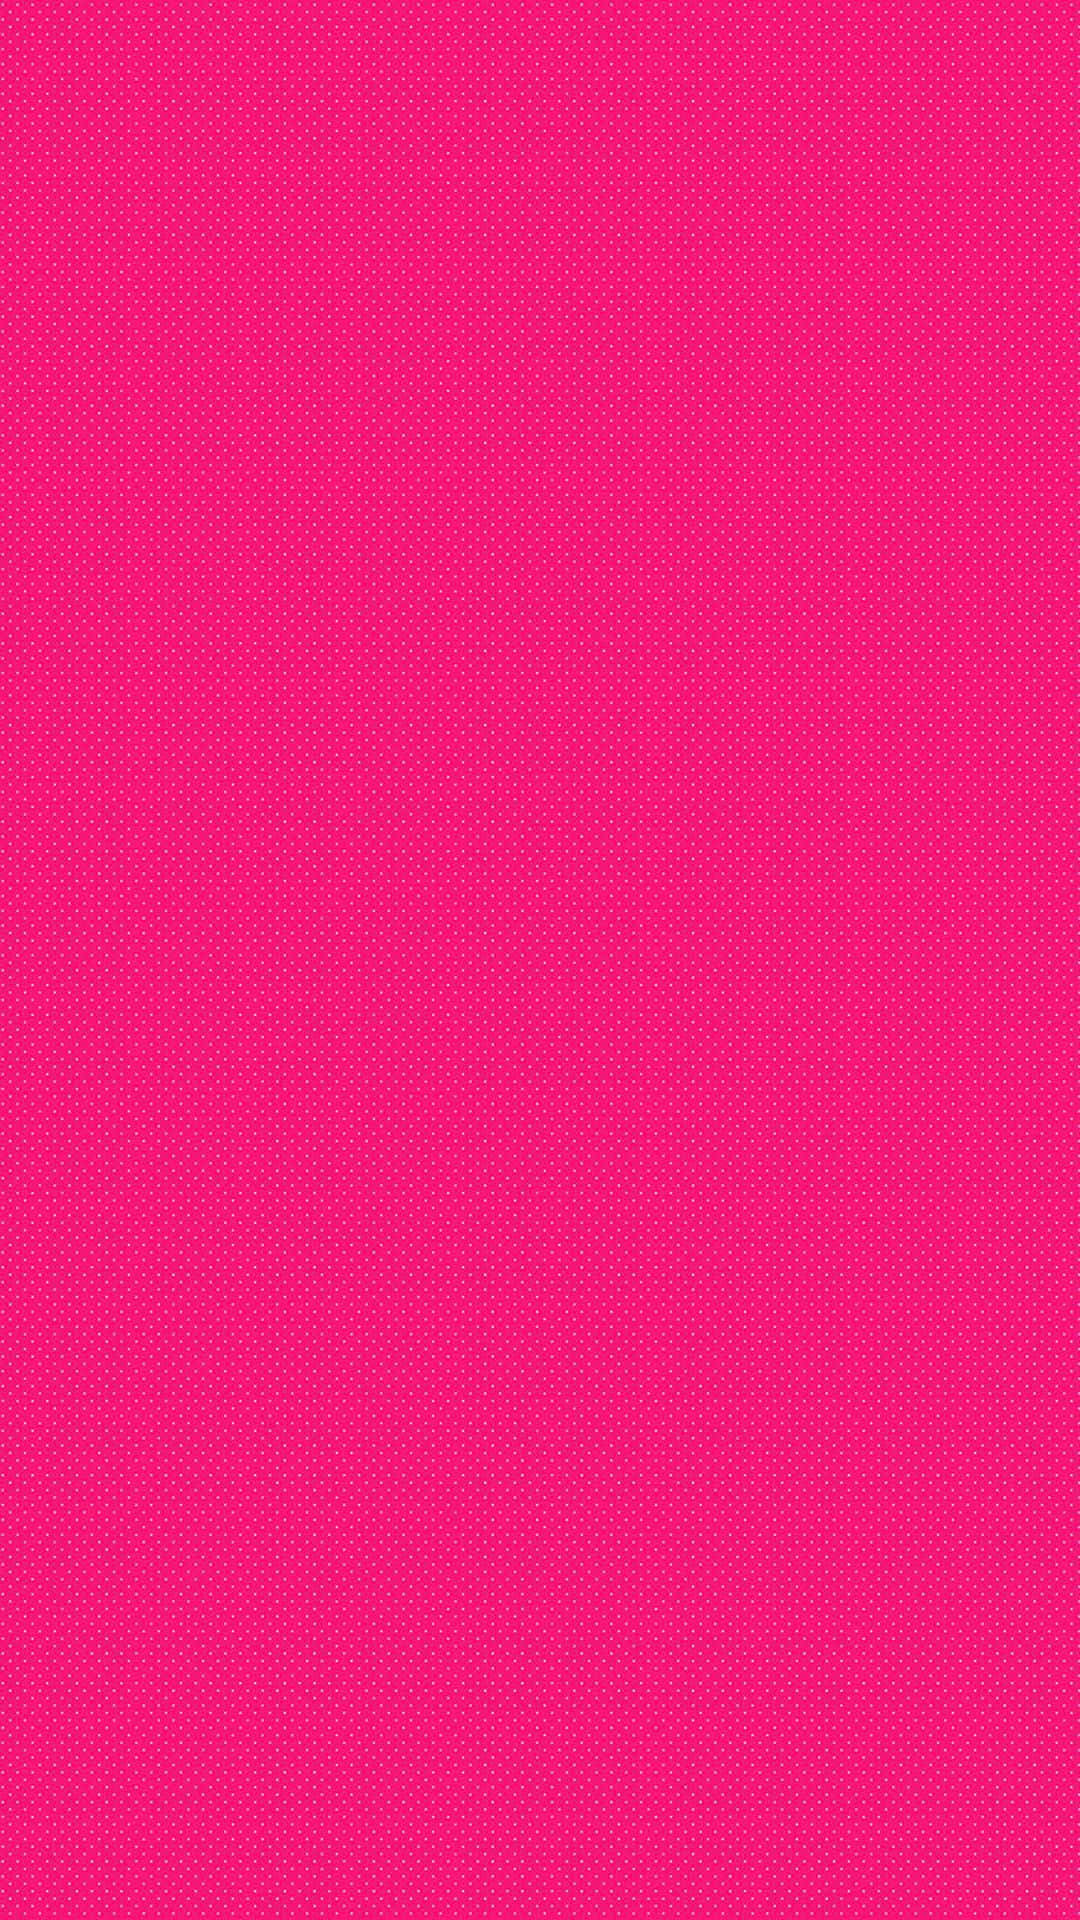 Brighten up the day with a beautiful bright pink background!